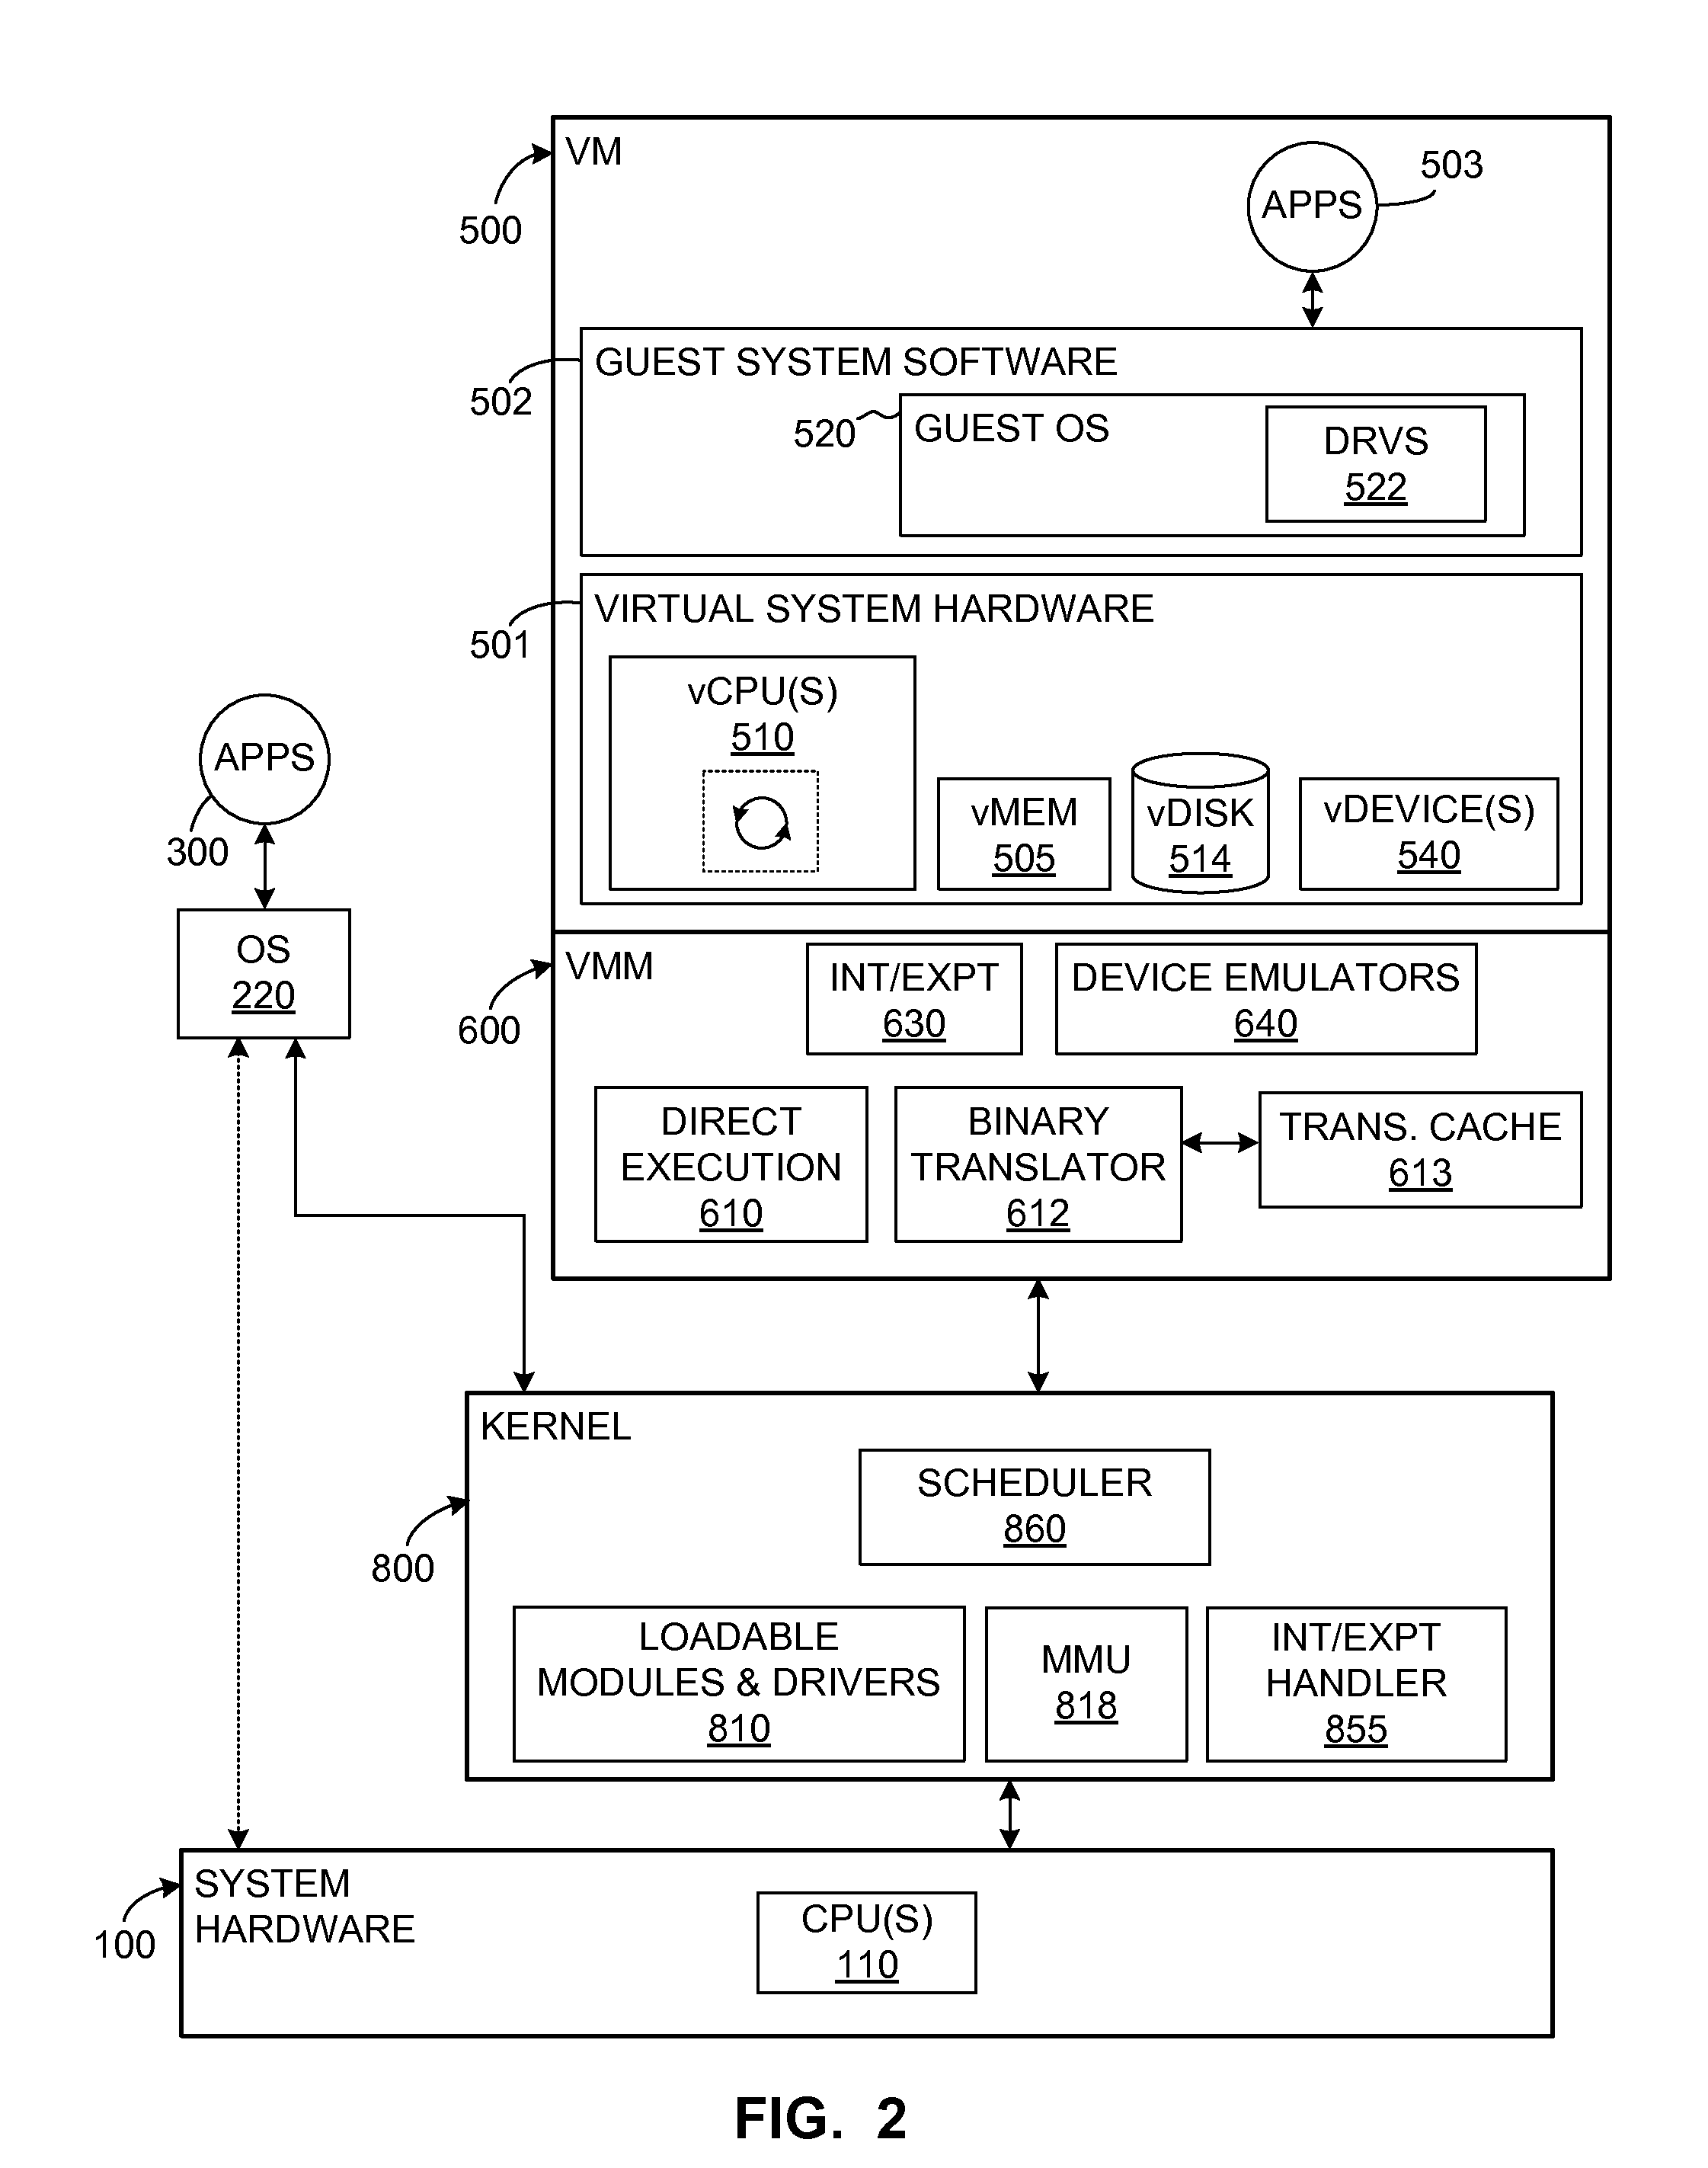 Selective descheduling of idling guests running on a host computer system